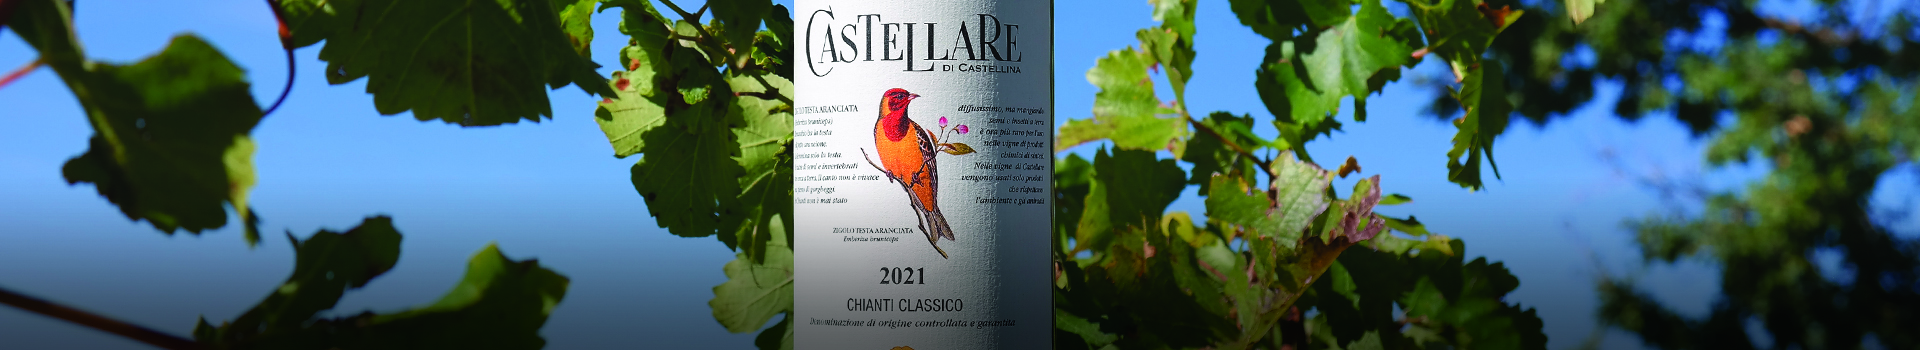 THE RED-HEADED BUNTINGIS THE LITTLE BIRD OF THE NEW VINTAGE OF CASTELLARE CHIANTI CLASSICO